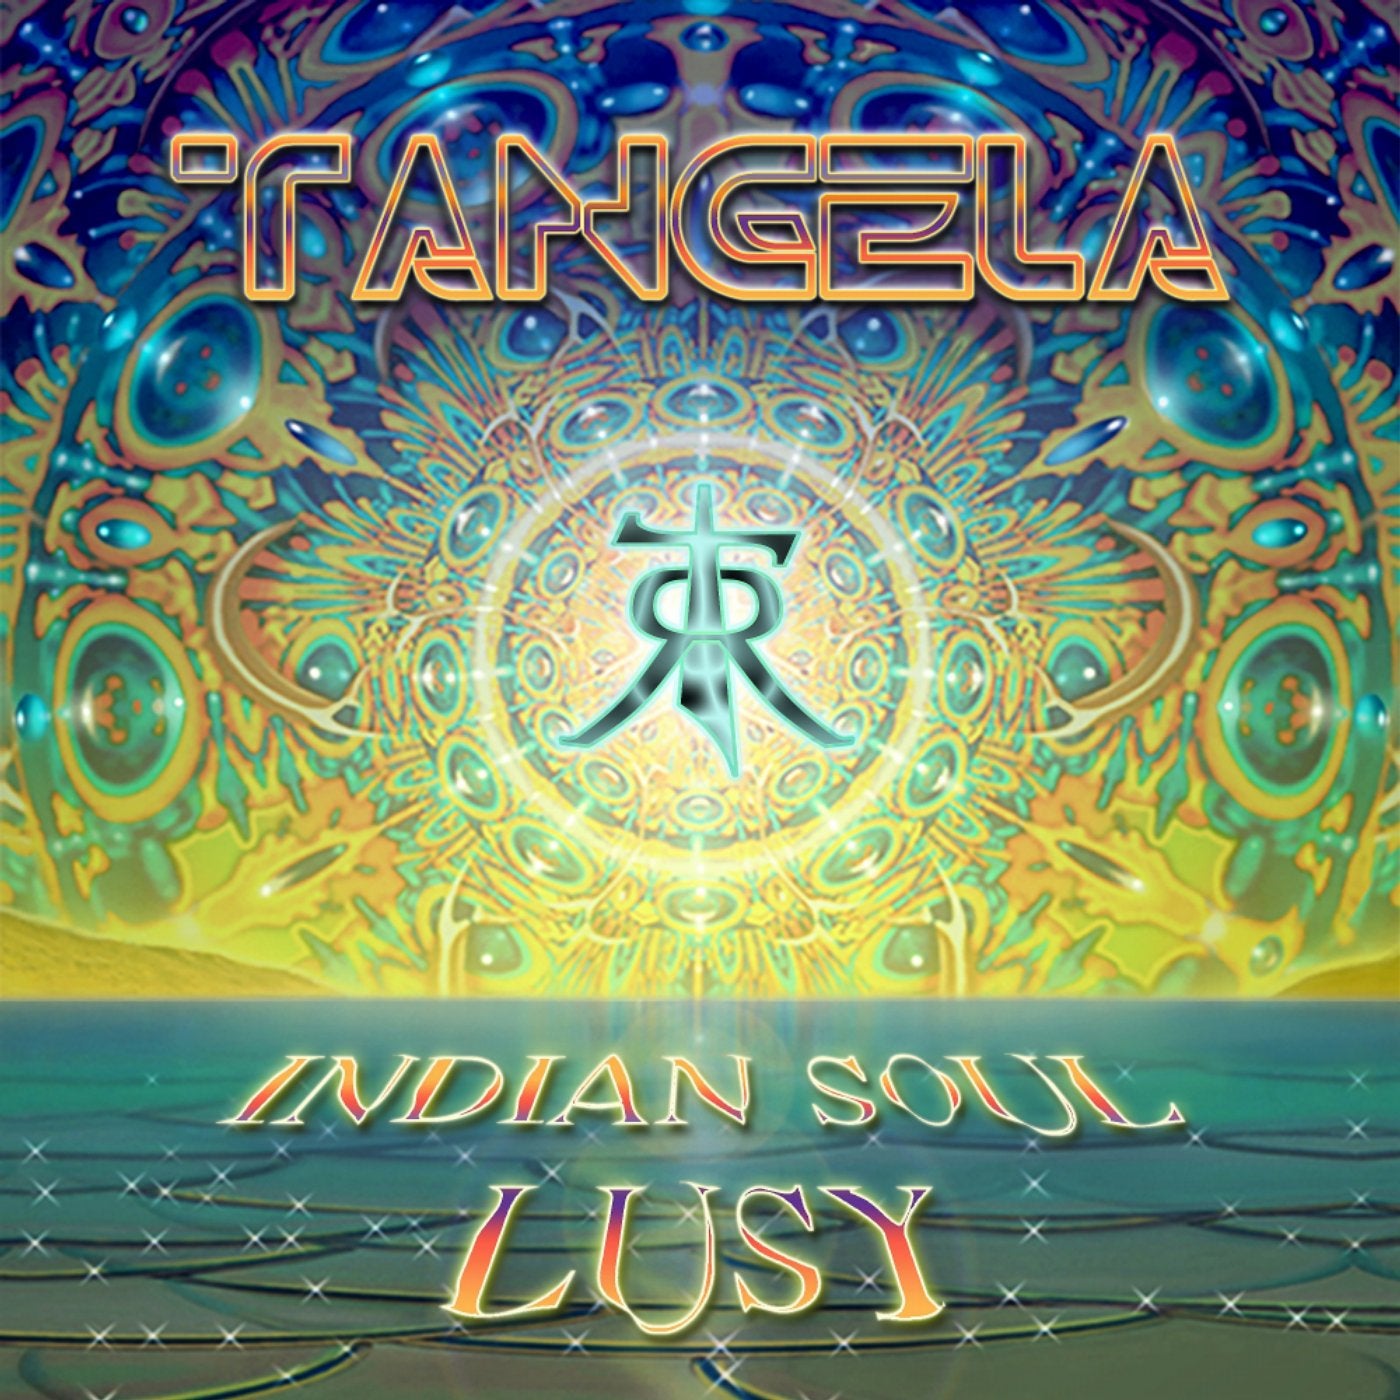 Indian Soul EP